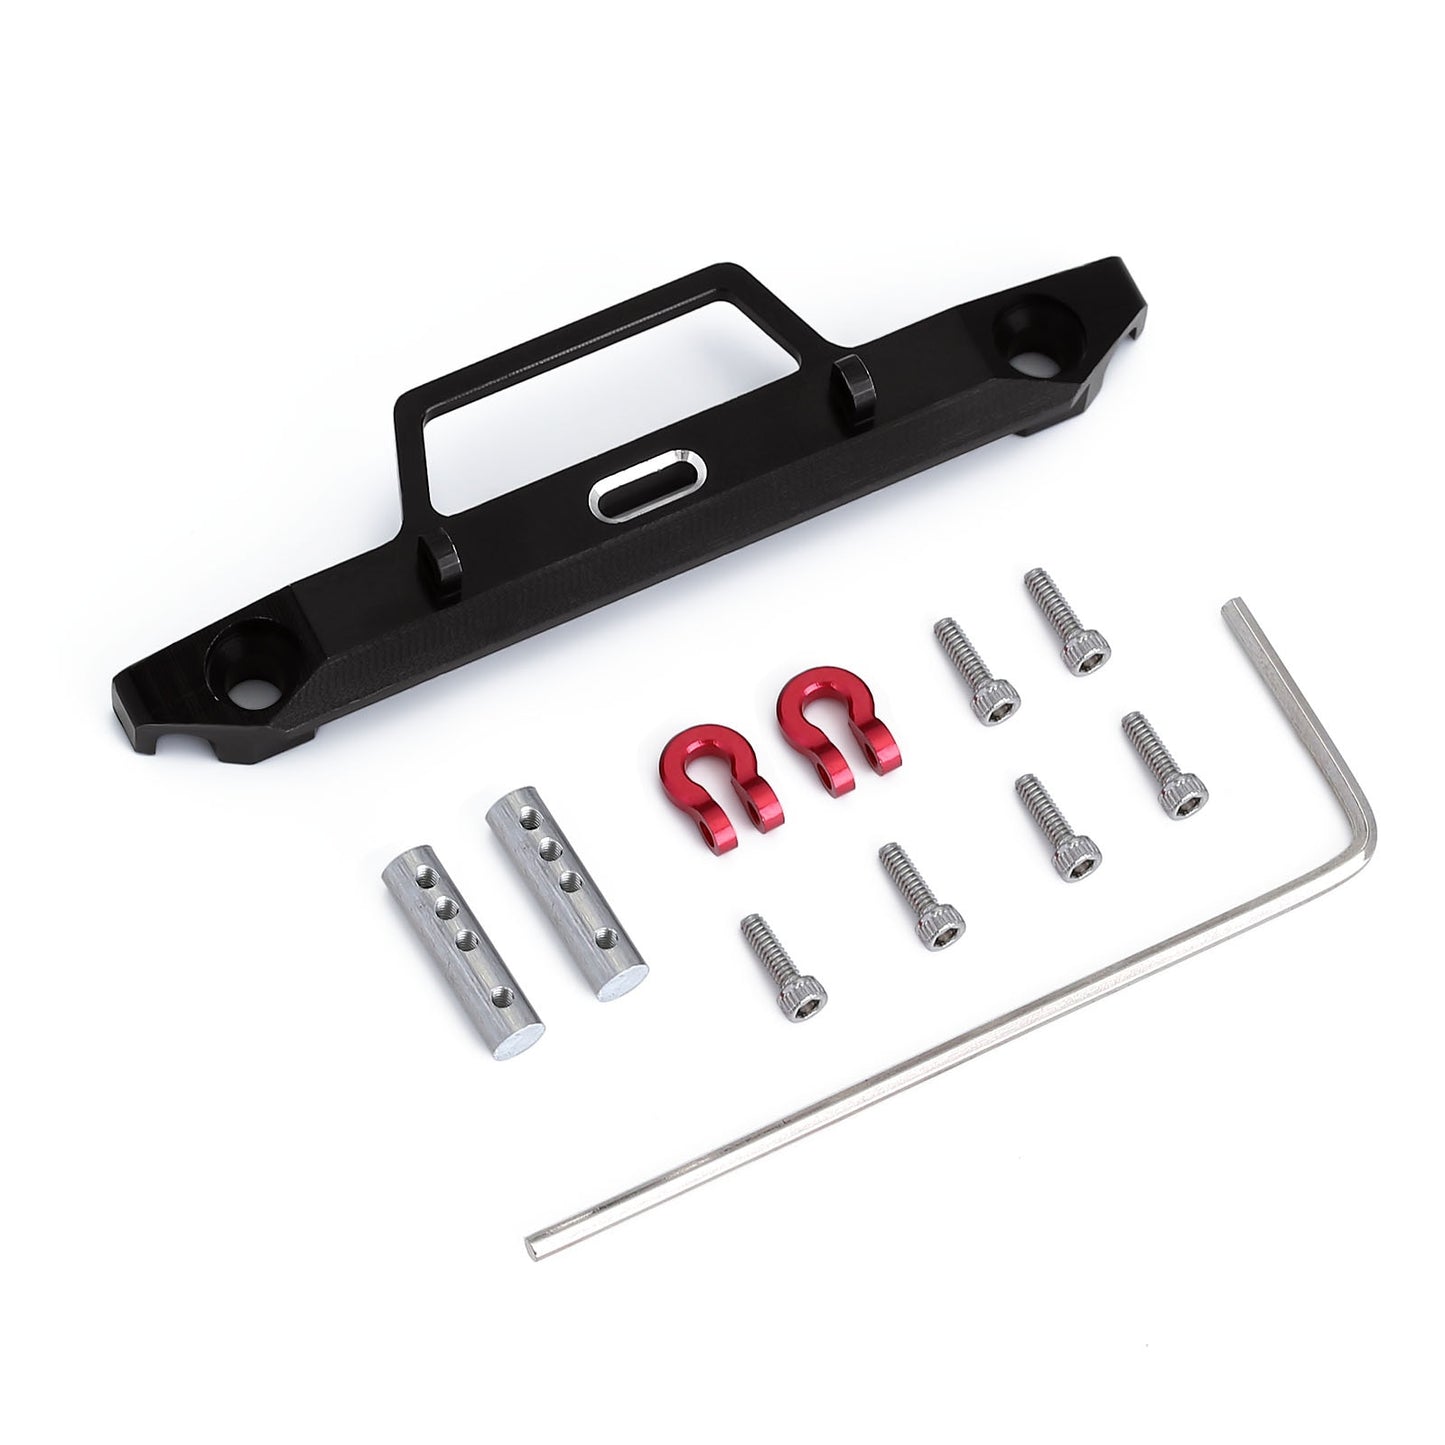 INJORA 58*15mm Metal Front Bumper with Hook for 1/24 RC Crawler